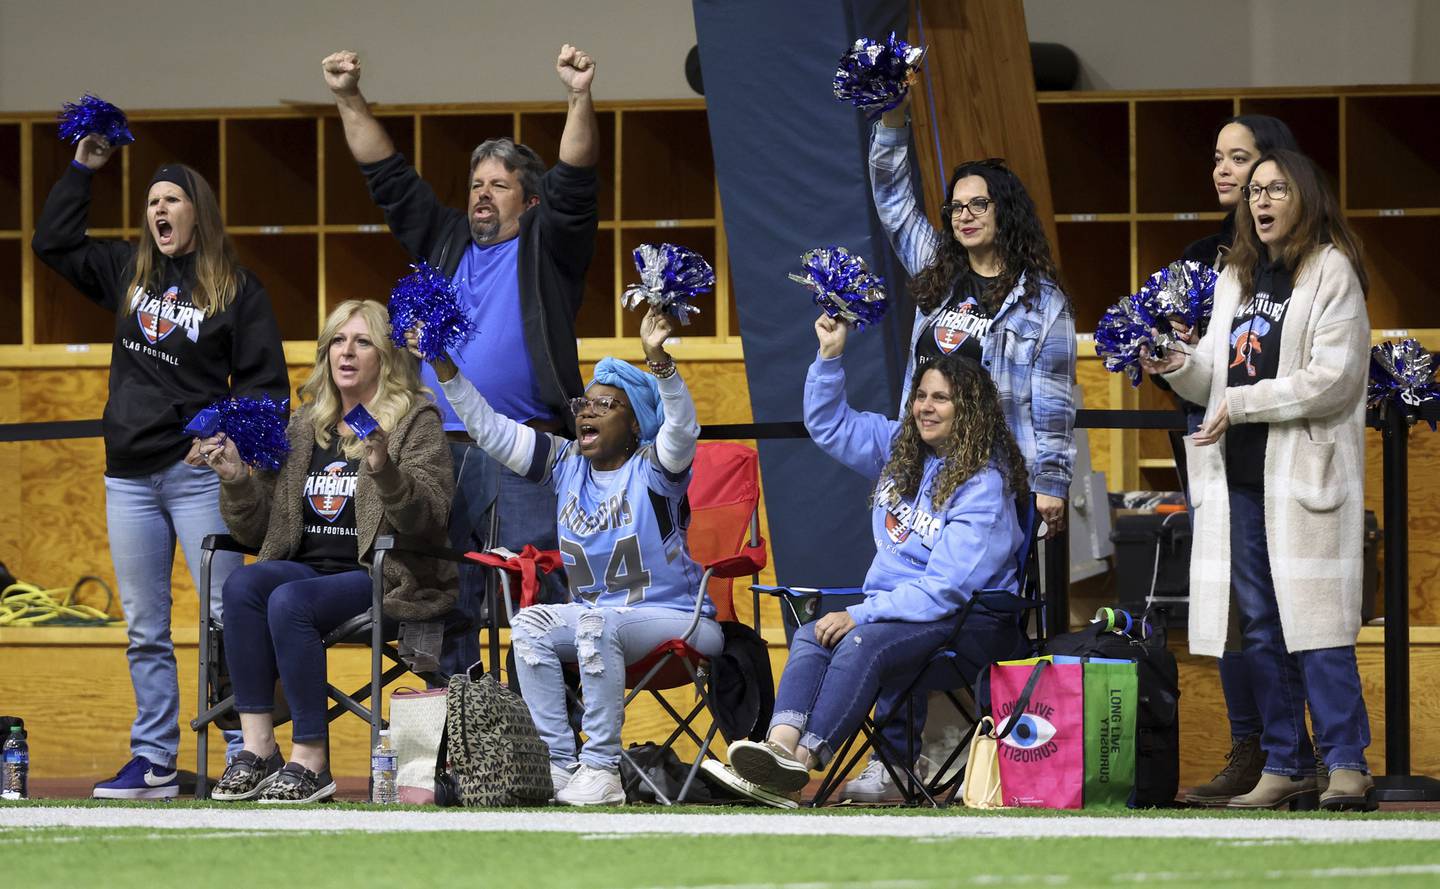 Willowbrook High School parents cheer during the championship game against Taft High School at Halas Hall in Lake Forest on Oct. 29, 2022.  